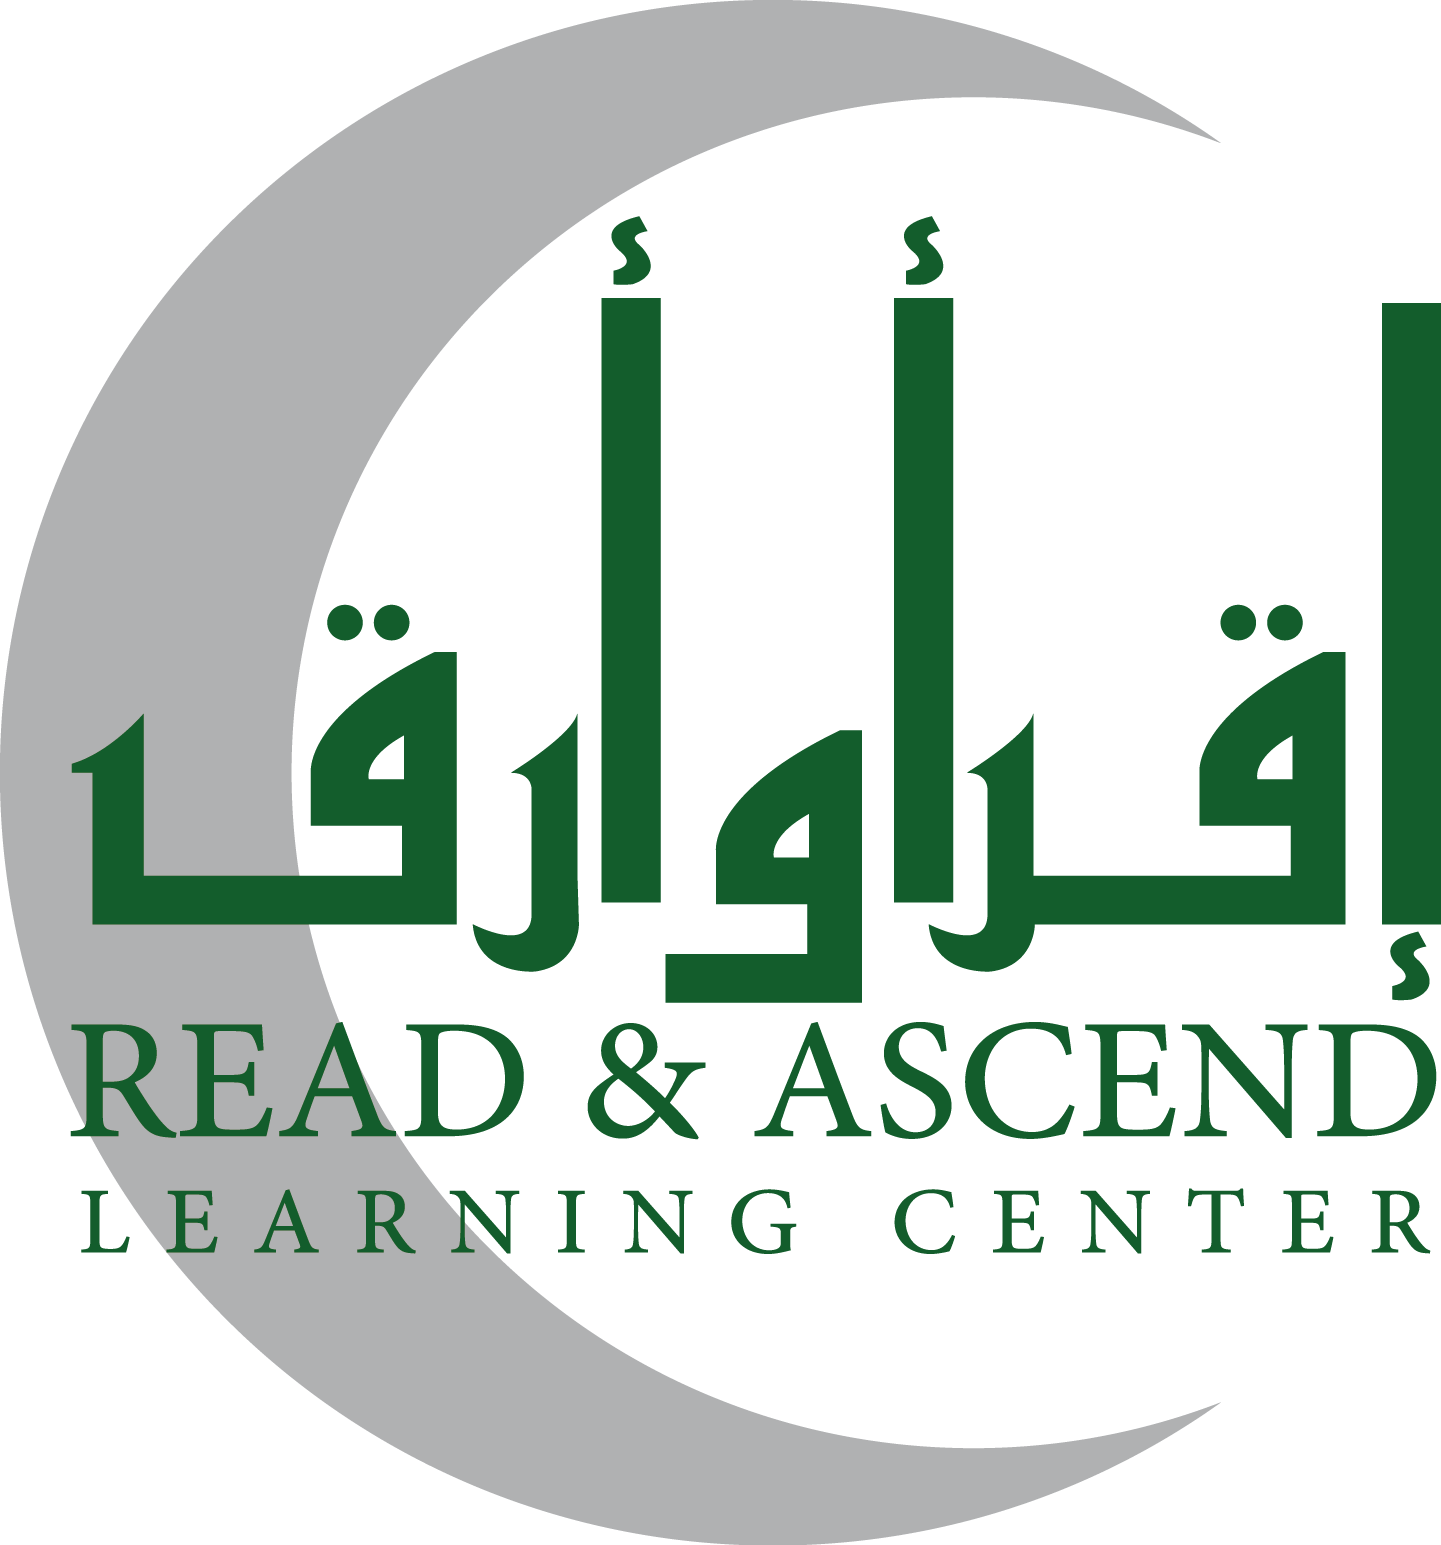 Read and Ascend Center